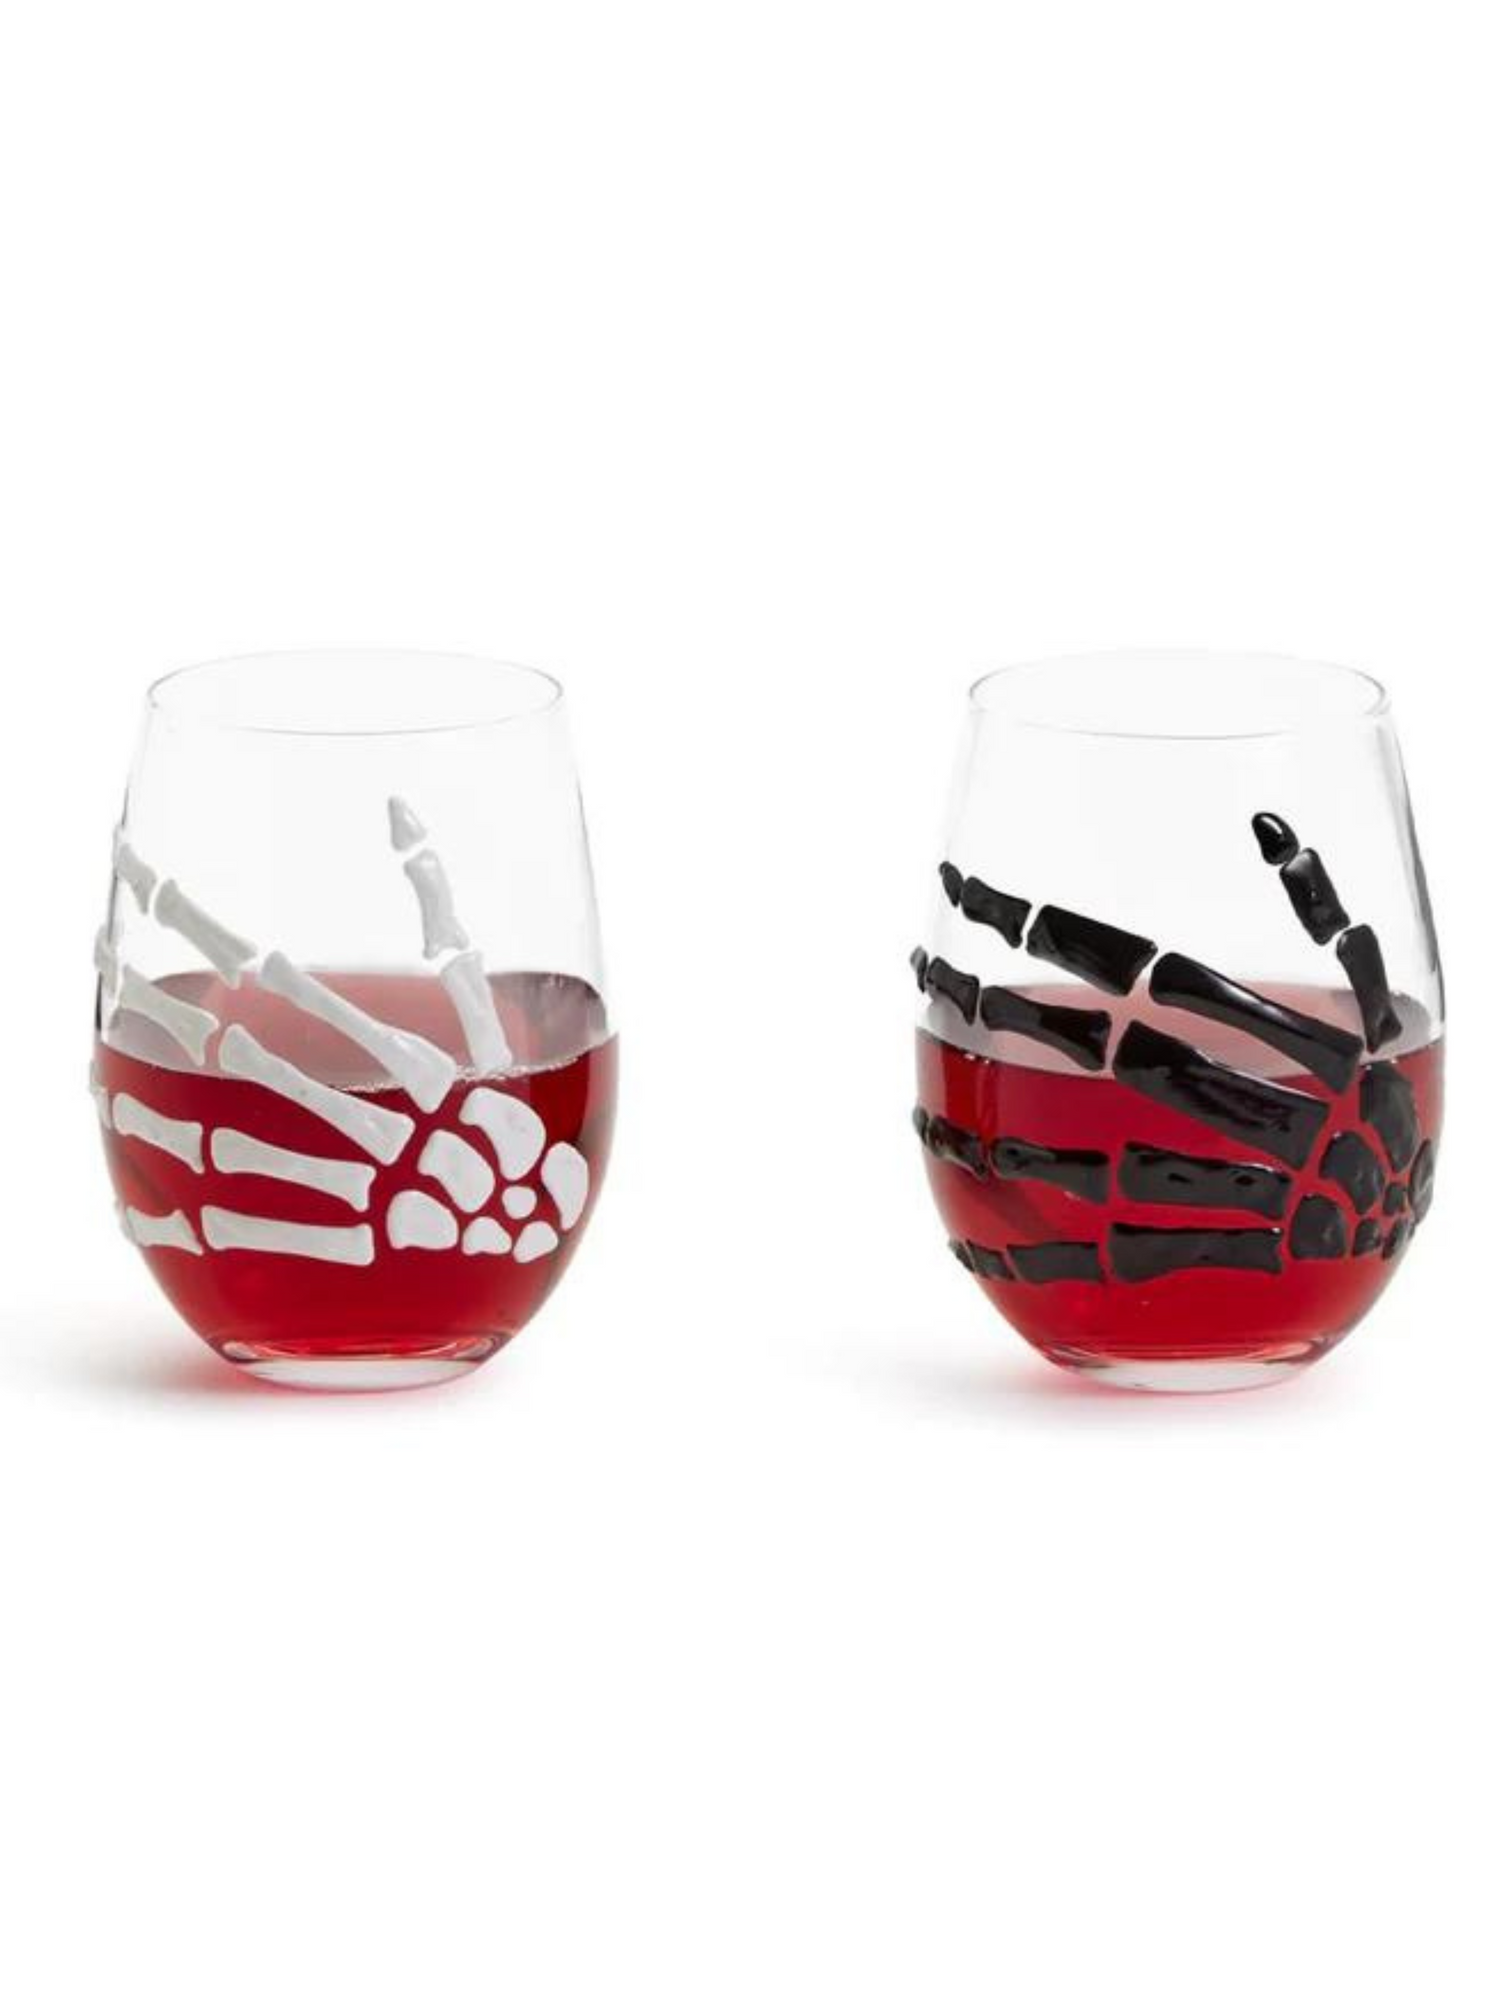 SKELETON HAND STEMLESS WINE GLASS - THE HIP EAGLE BOUTIQUE